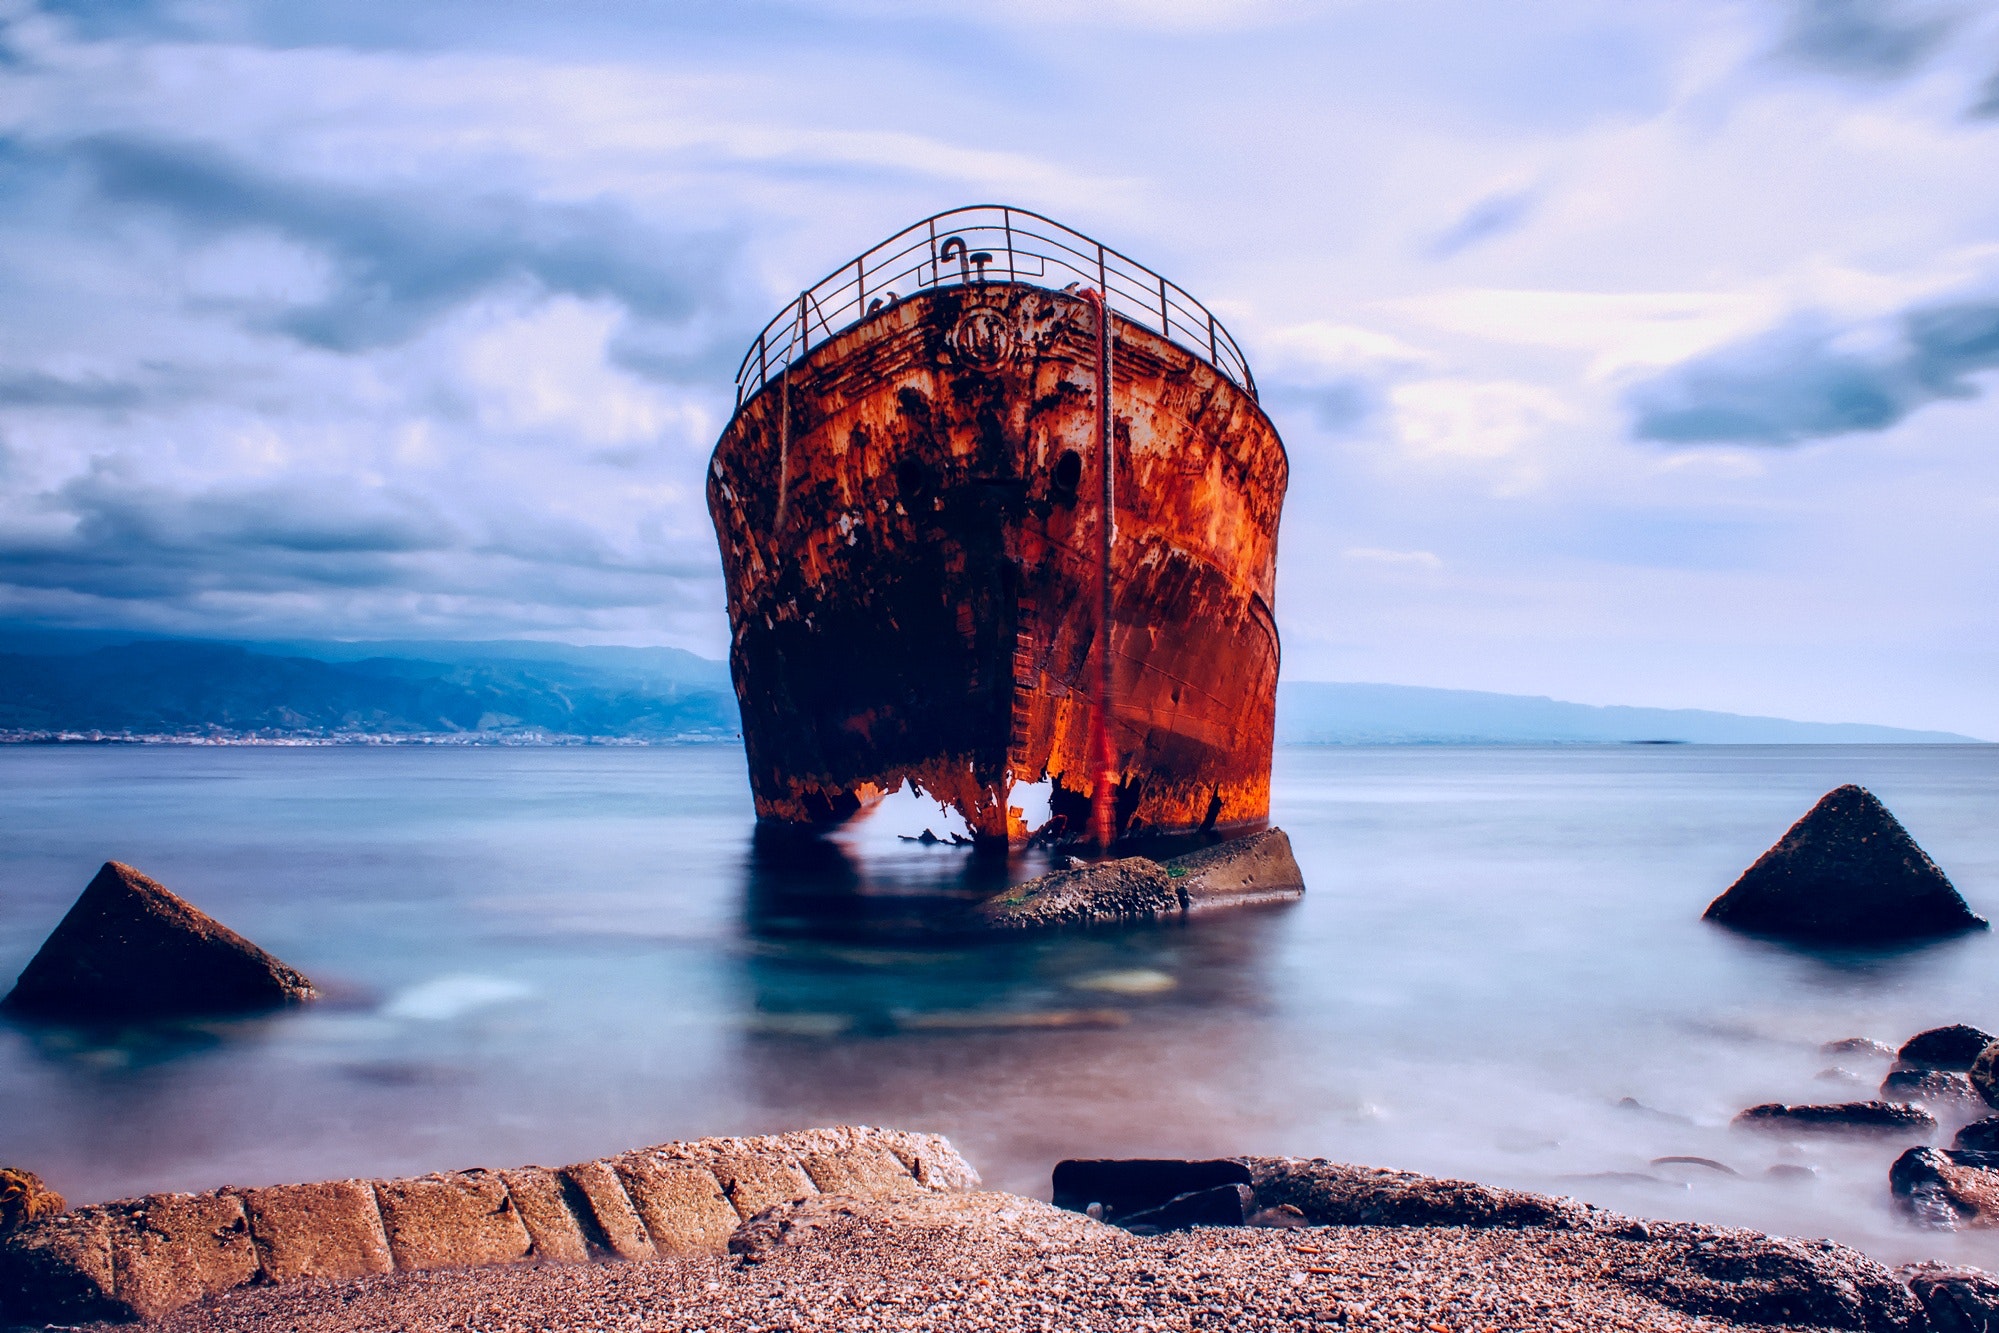 General 1999x1333 old sea sky wreck rust shipwreck outdoors water ship